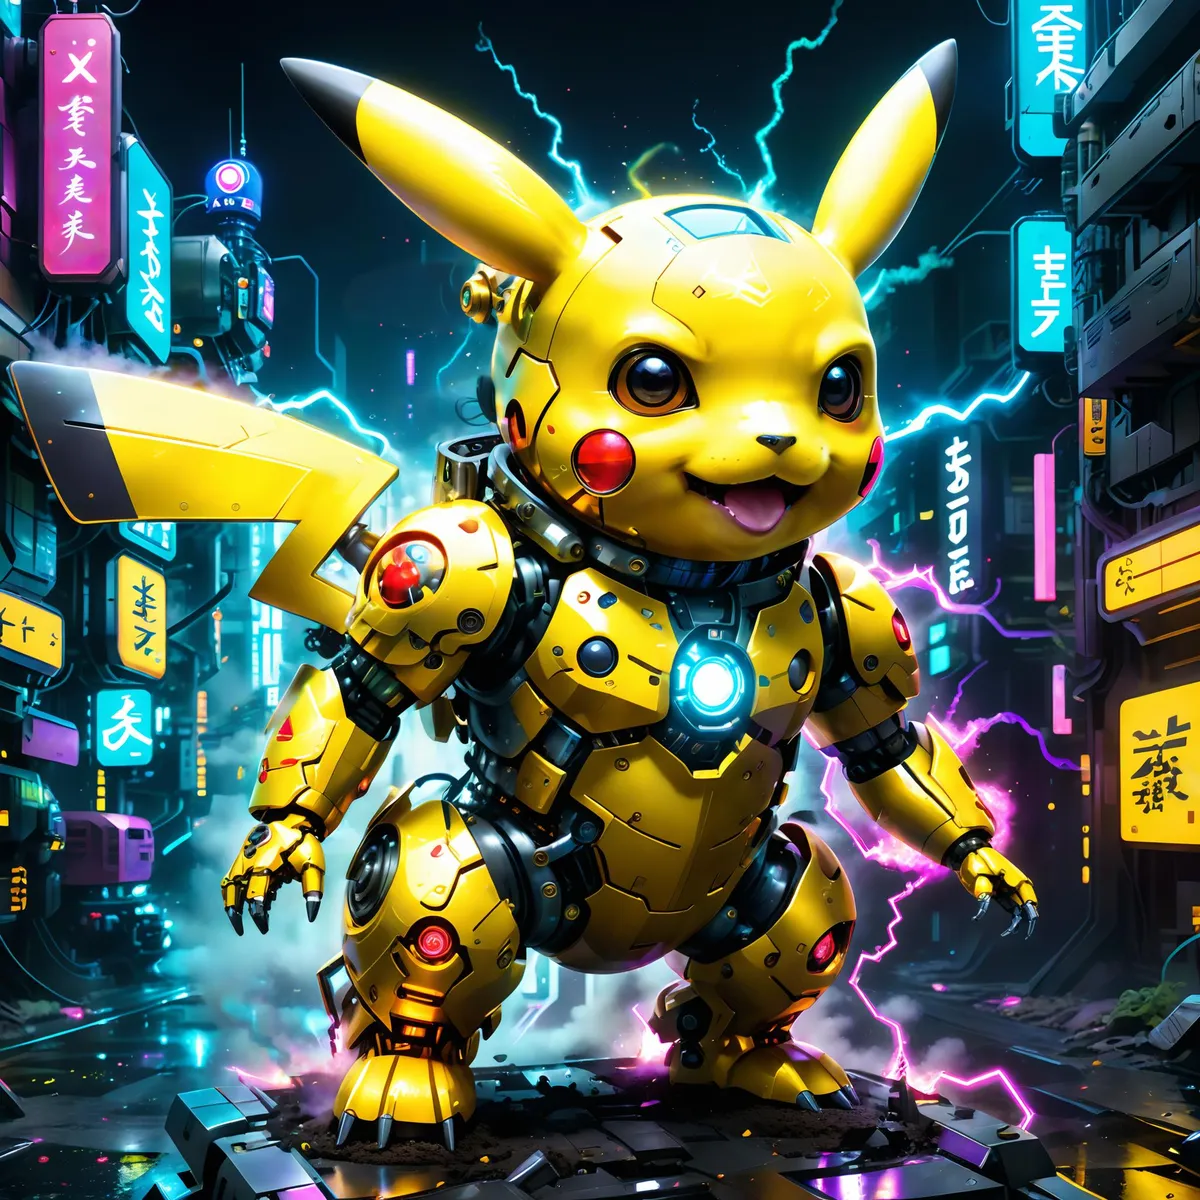 AI generated image using stable diffusion of a cyberpunk Pikachu in a neon-lit futuristic city.